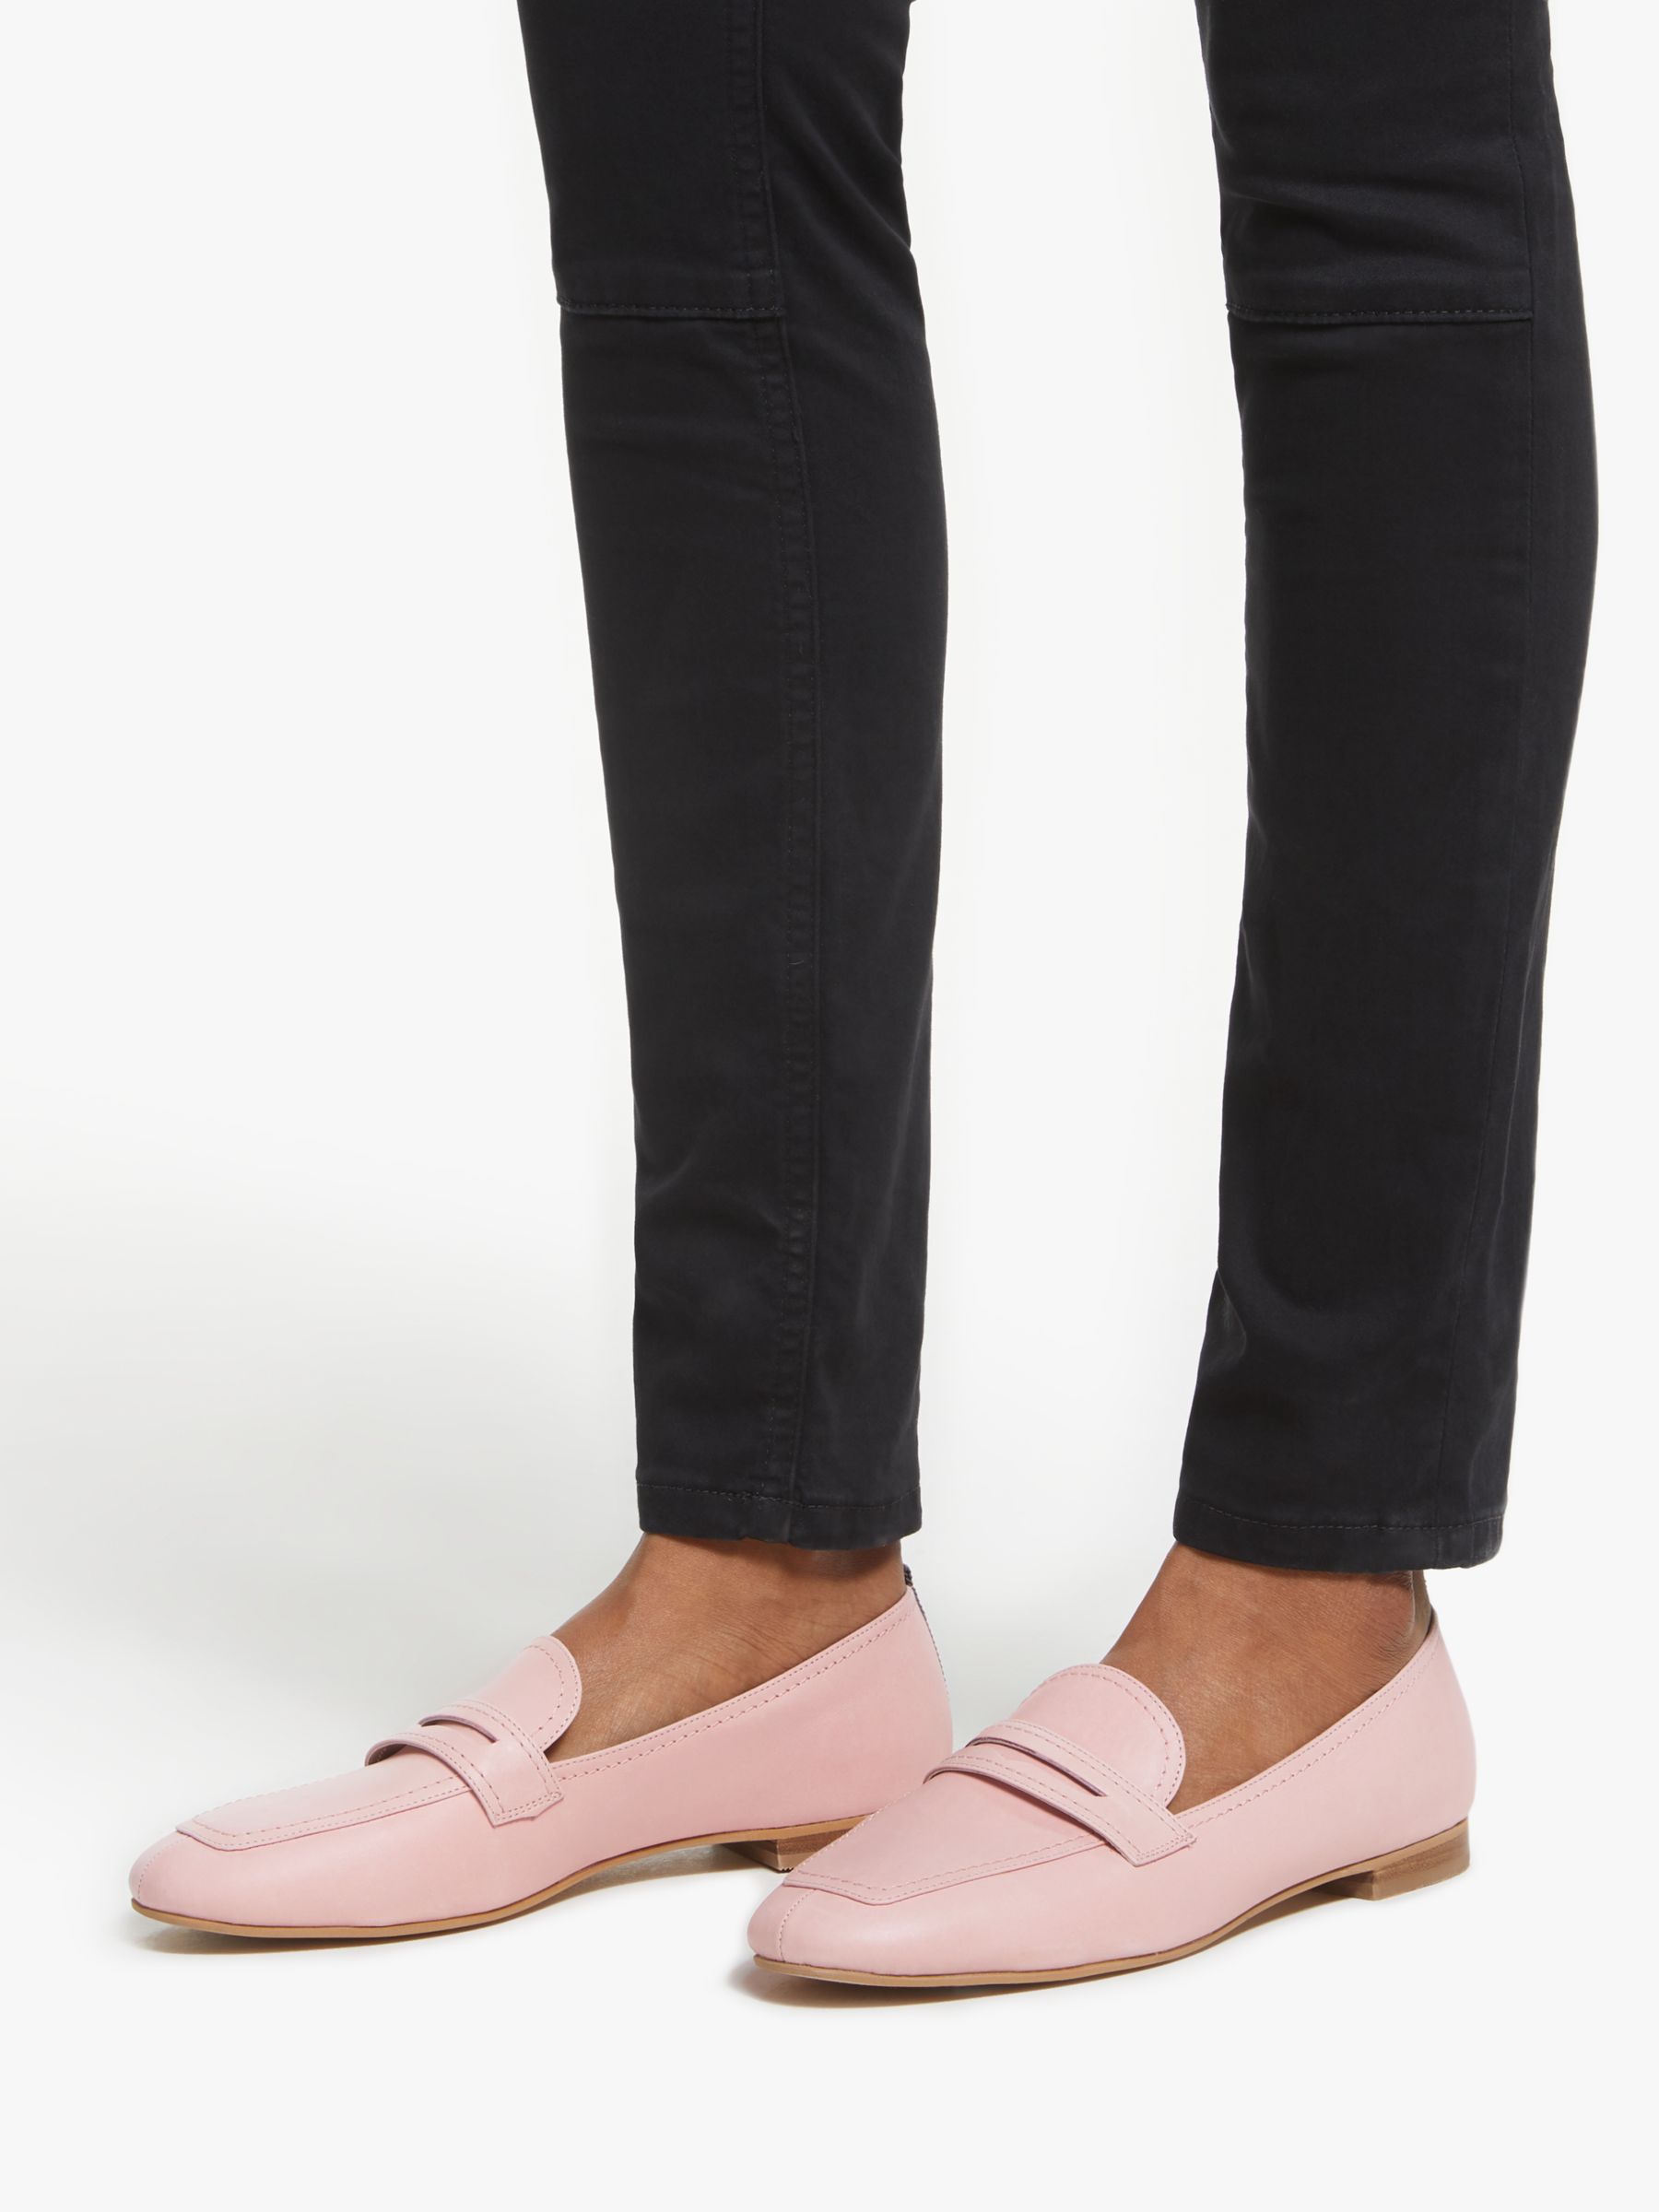 Boden Georgina Loafers, Chalky Pink 